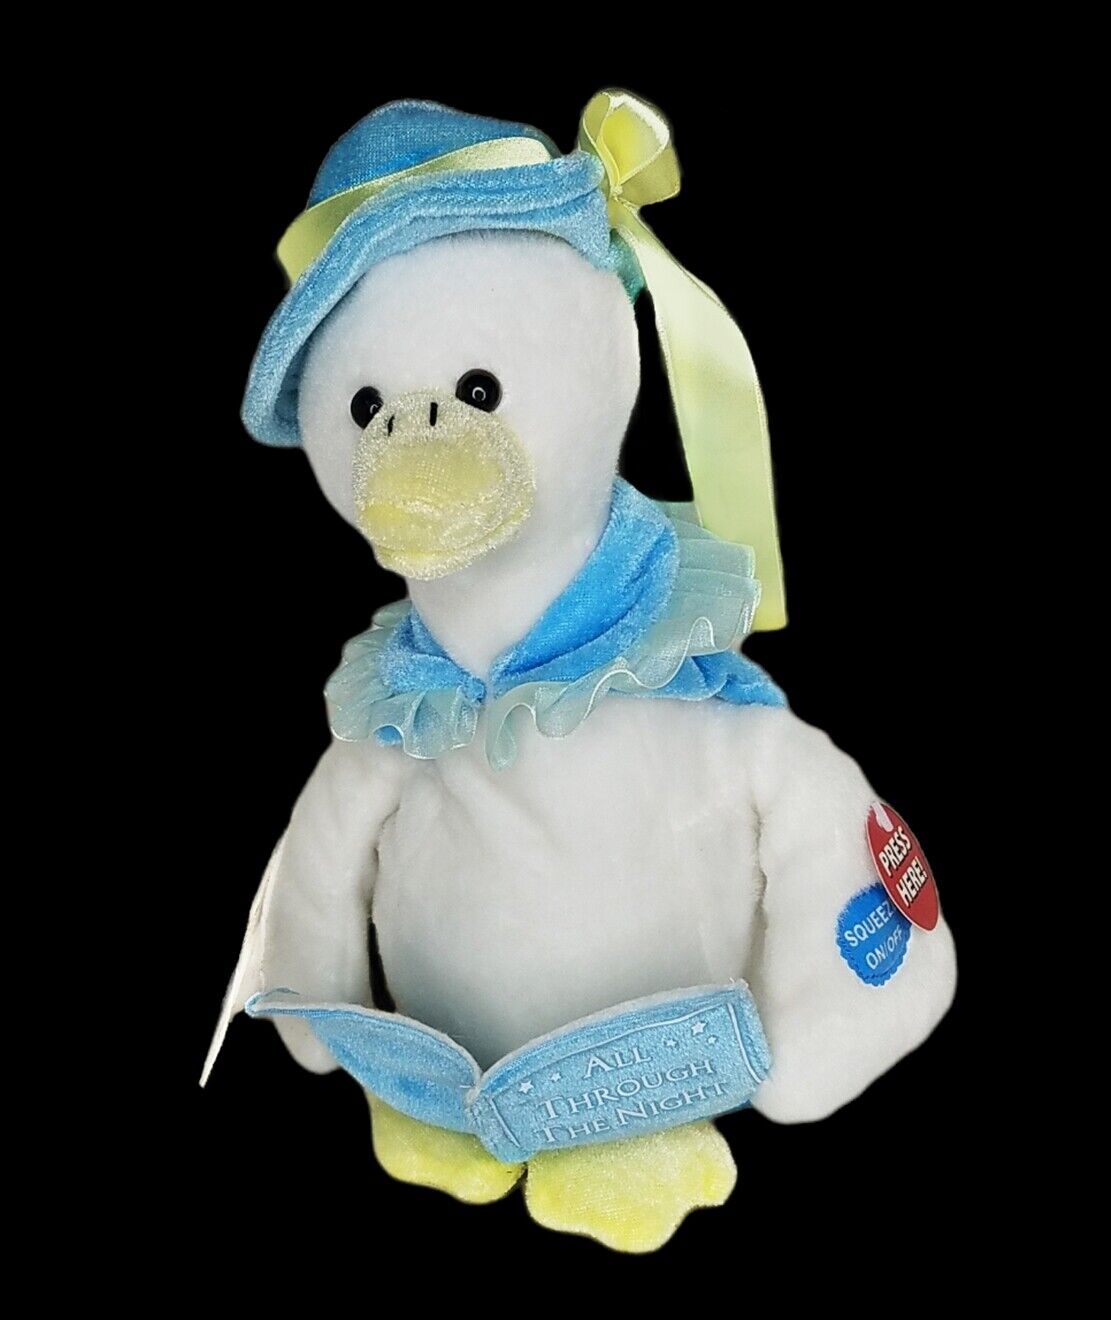 Goodnight Goose Animated Plush Musical Lullaby Singing All Through The Night New